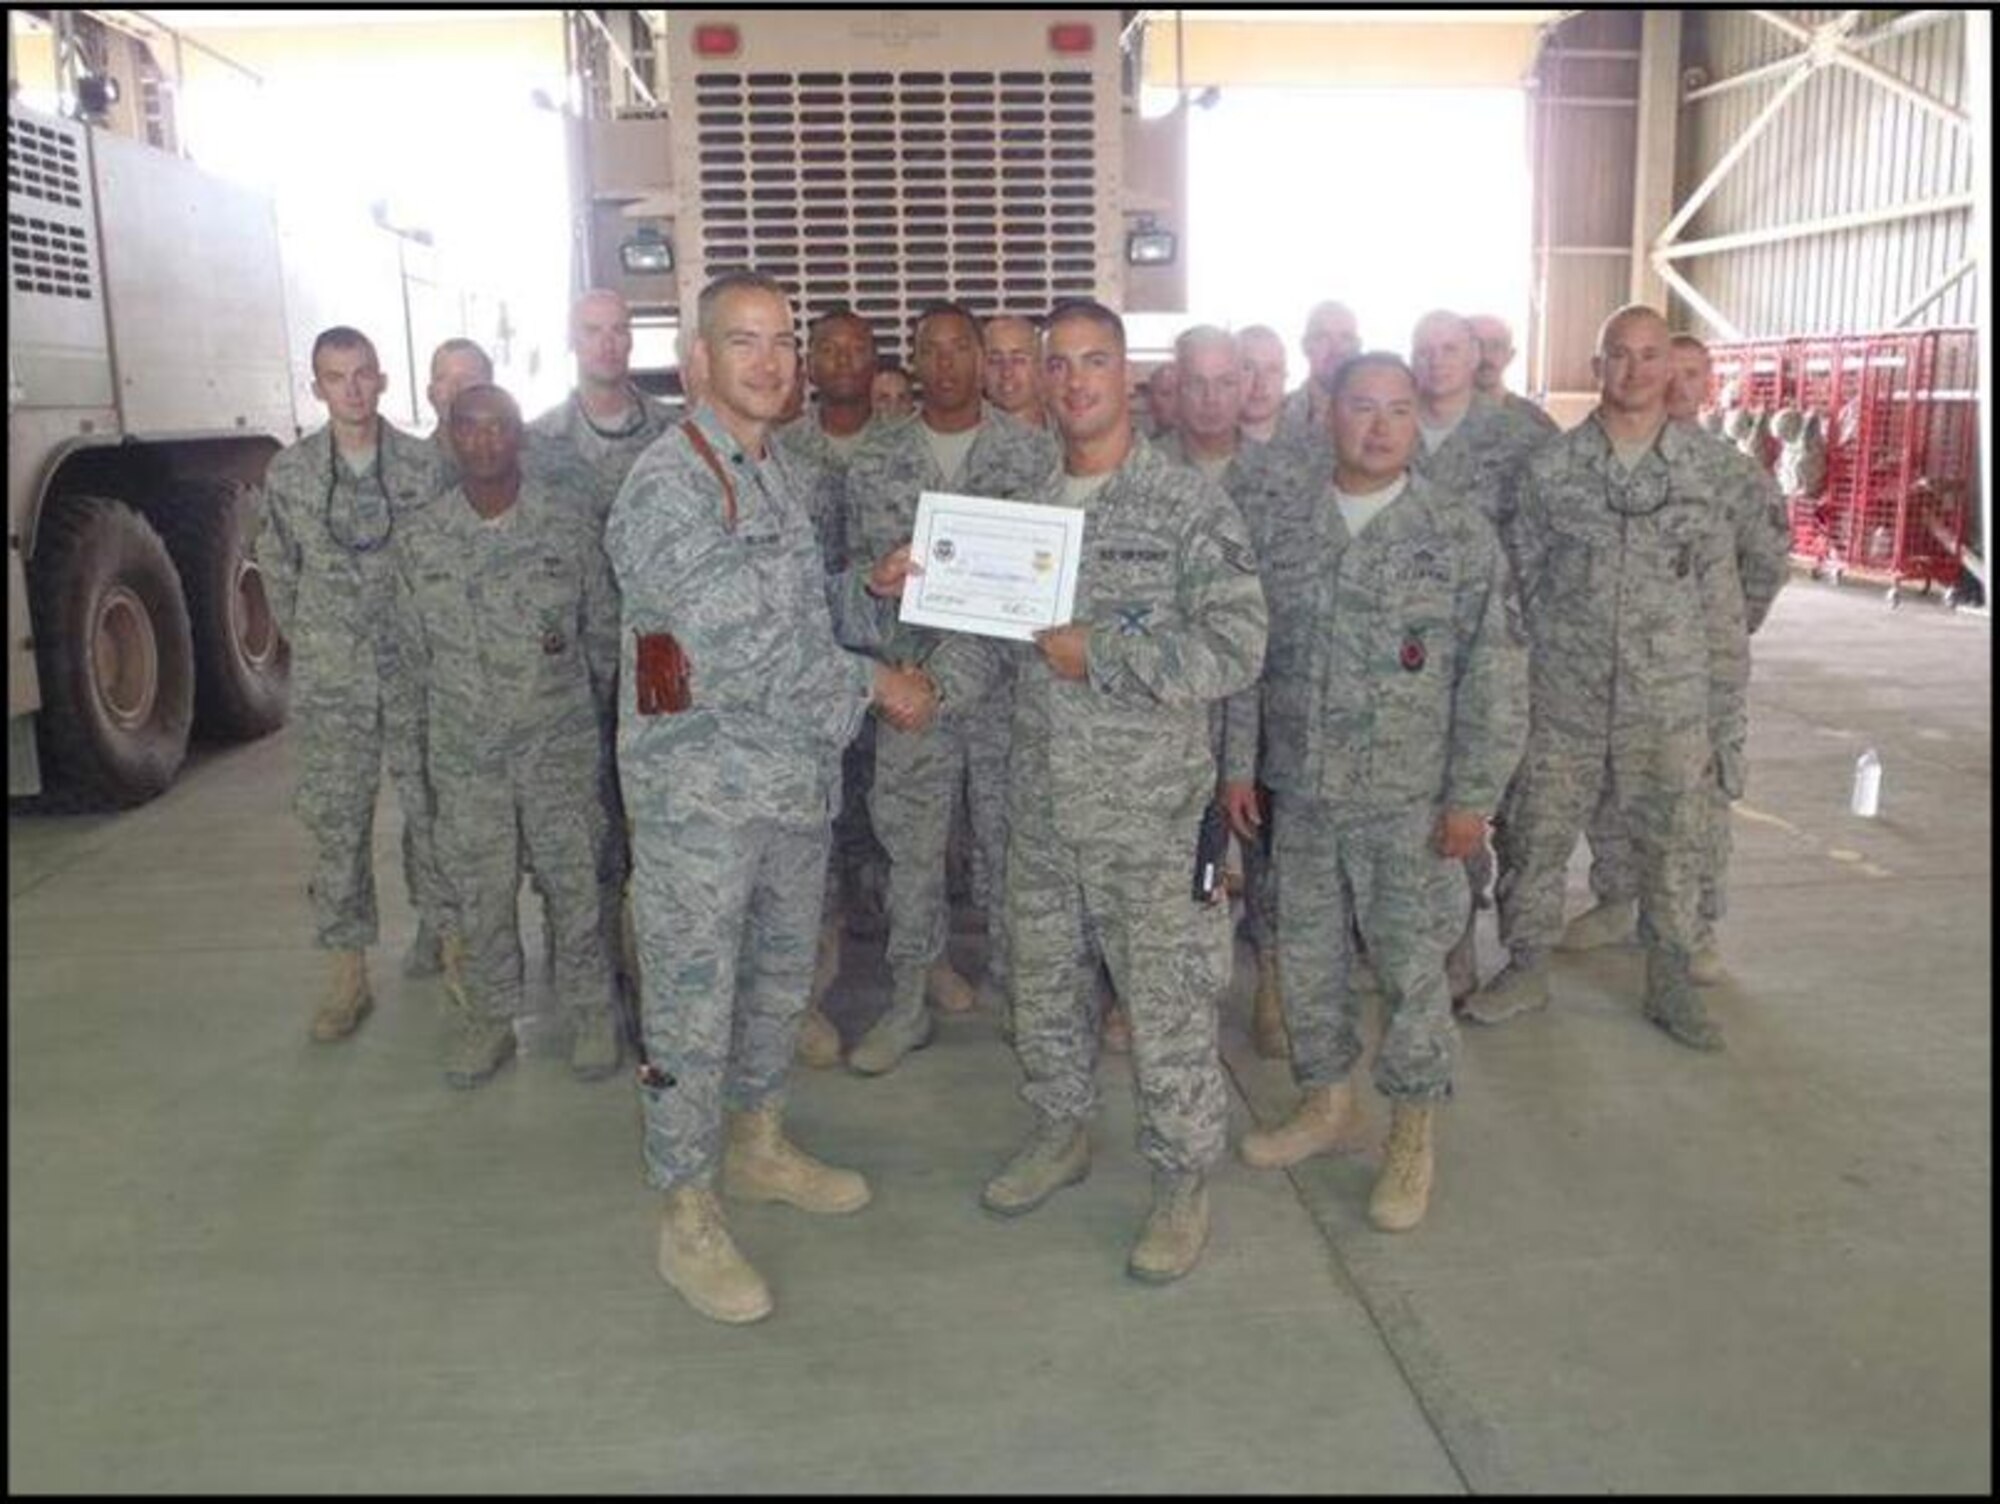 Staff Sgt. Joseph D. Startup (right), a firefighter with the 103rd  Civil Engineer Squadron, receives a handshake and a certificate after being recognized recently as the Tuskegee Airman of the Week while assigned to the 332nd Expeditionary Civil Engineer Squadron, Joint Base Balad, Iraq. (Photo courtesy of Staff Sgt. Joseph D. Startup)